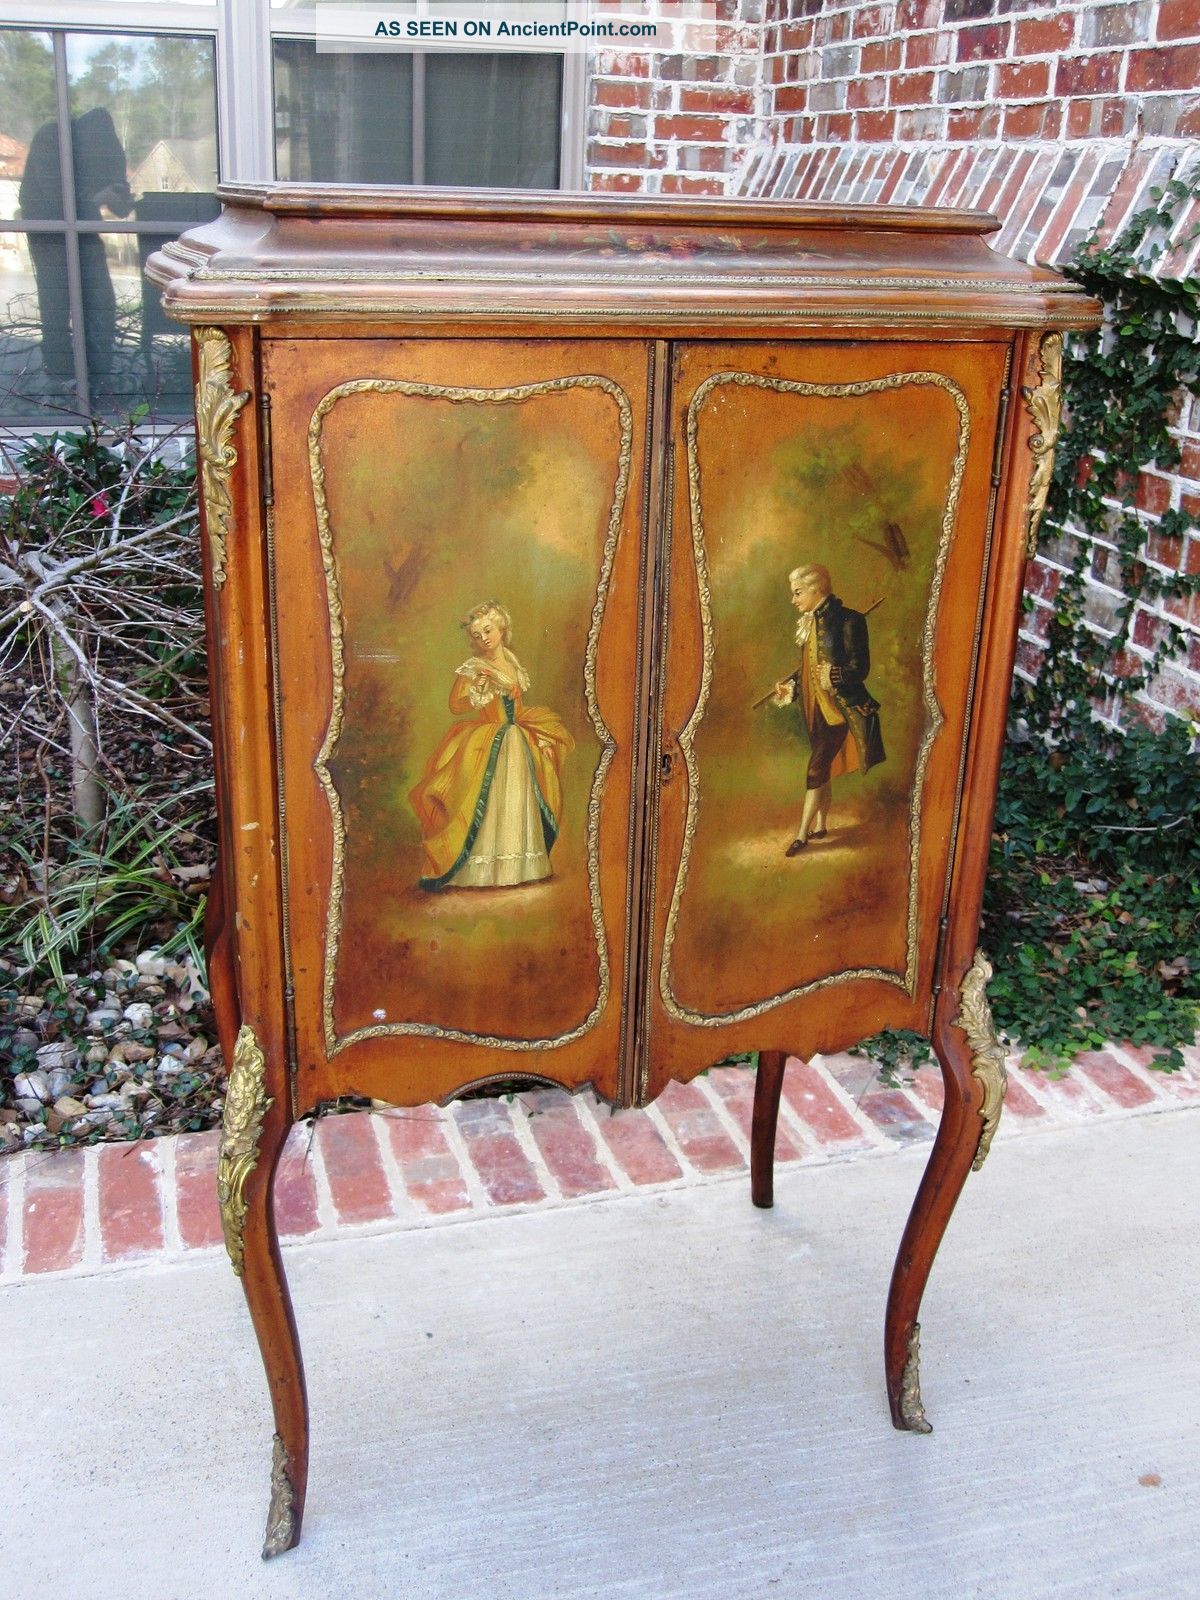 Exquisite Antique French Vernis Martin Painted Music Cabinet Ormolu Accent 19thc 1800-1899 photo